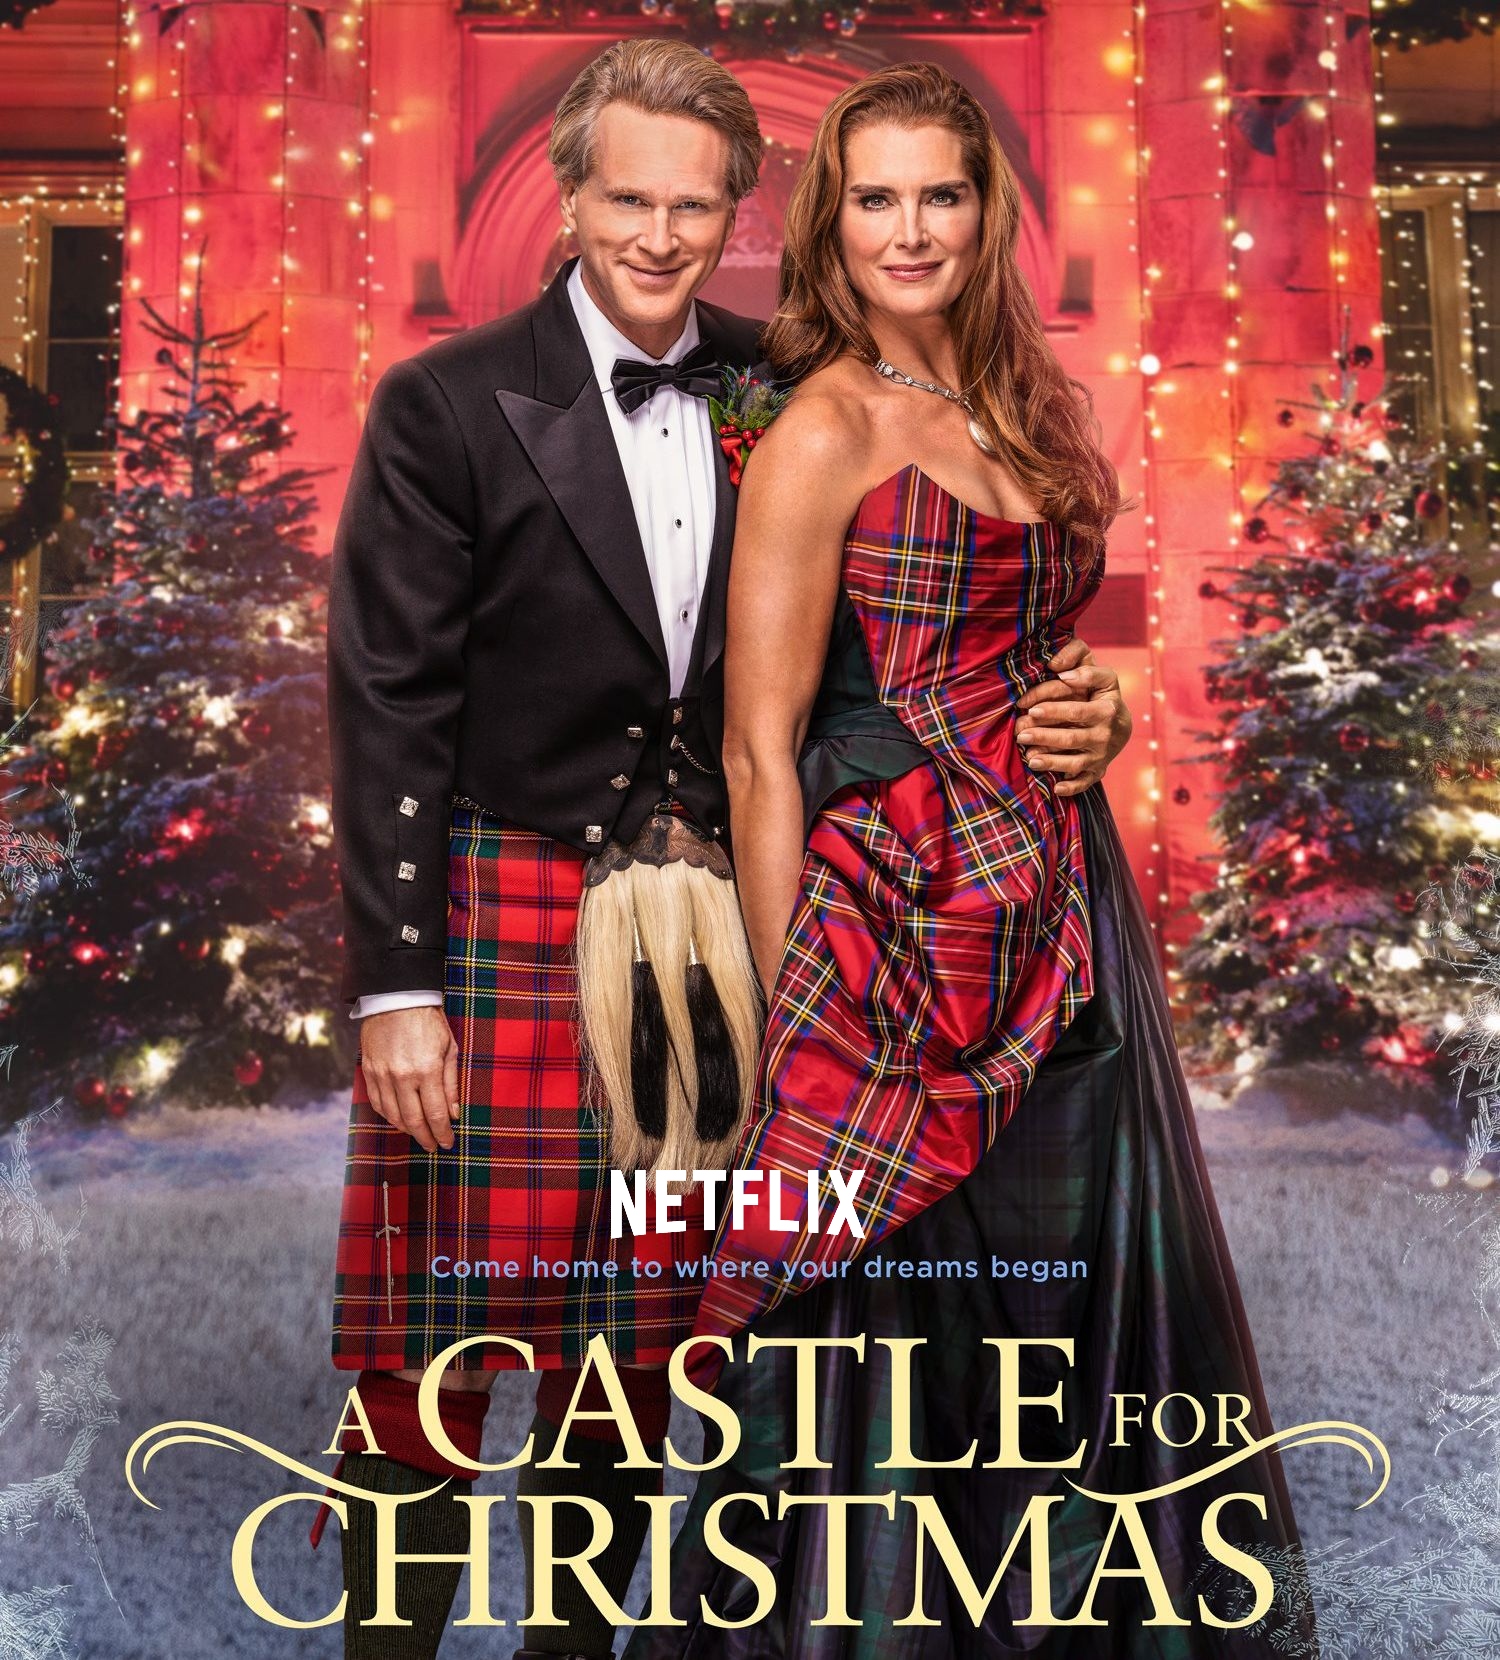 Is A Castle for Christmas on Netflix